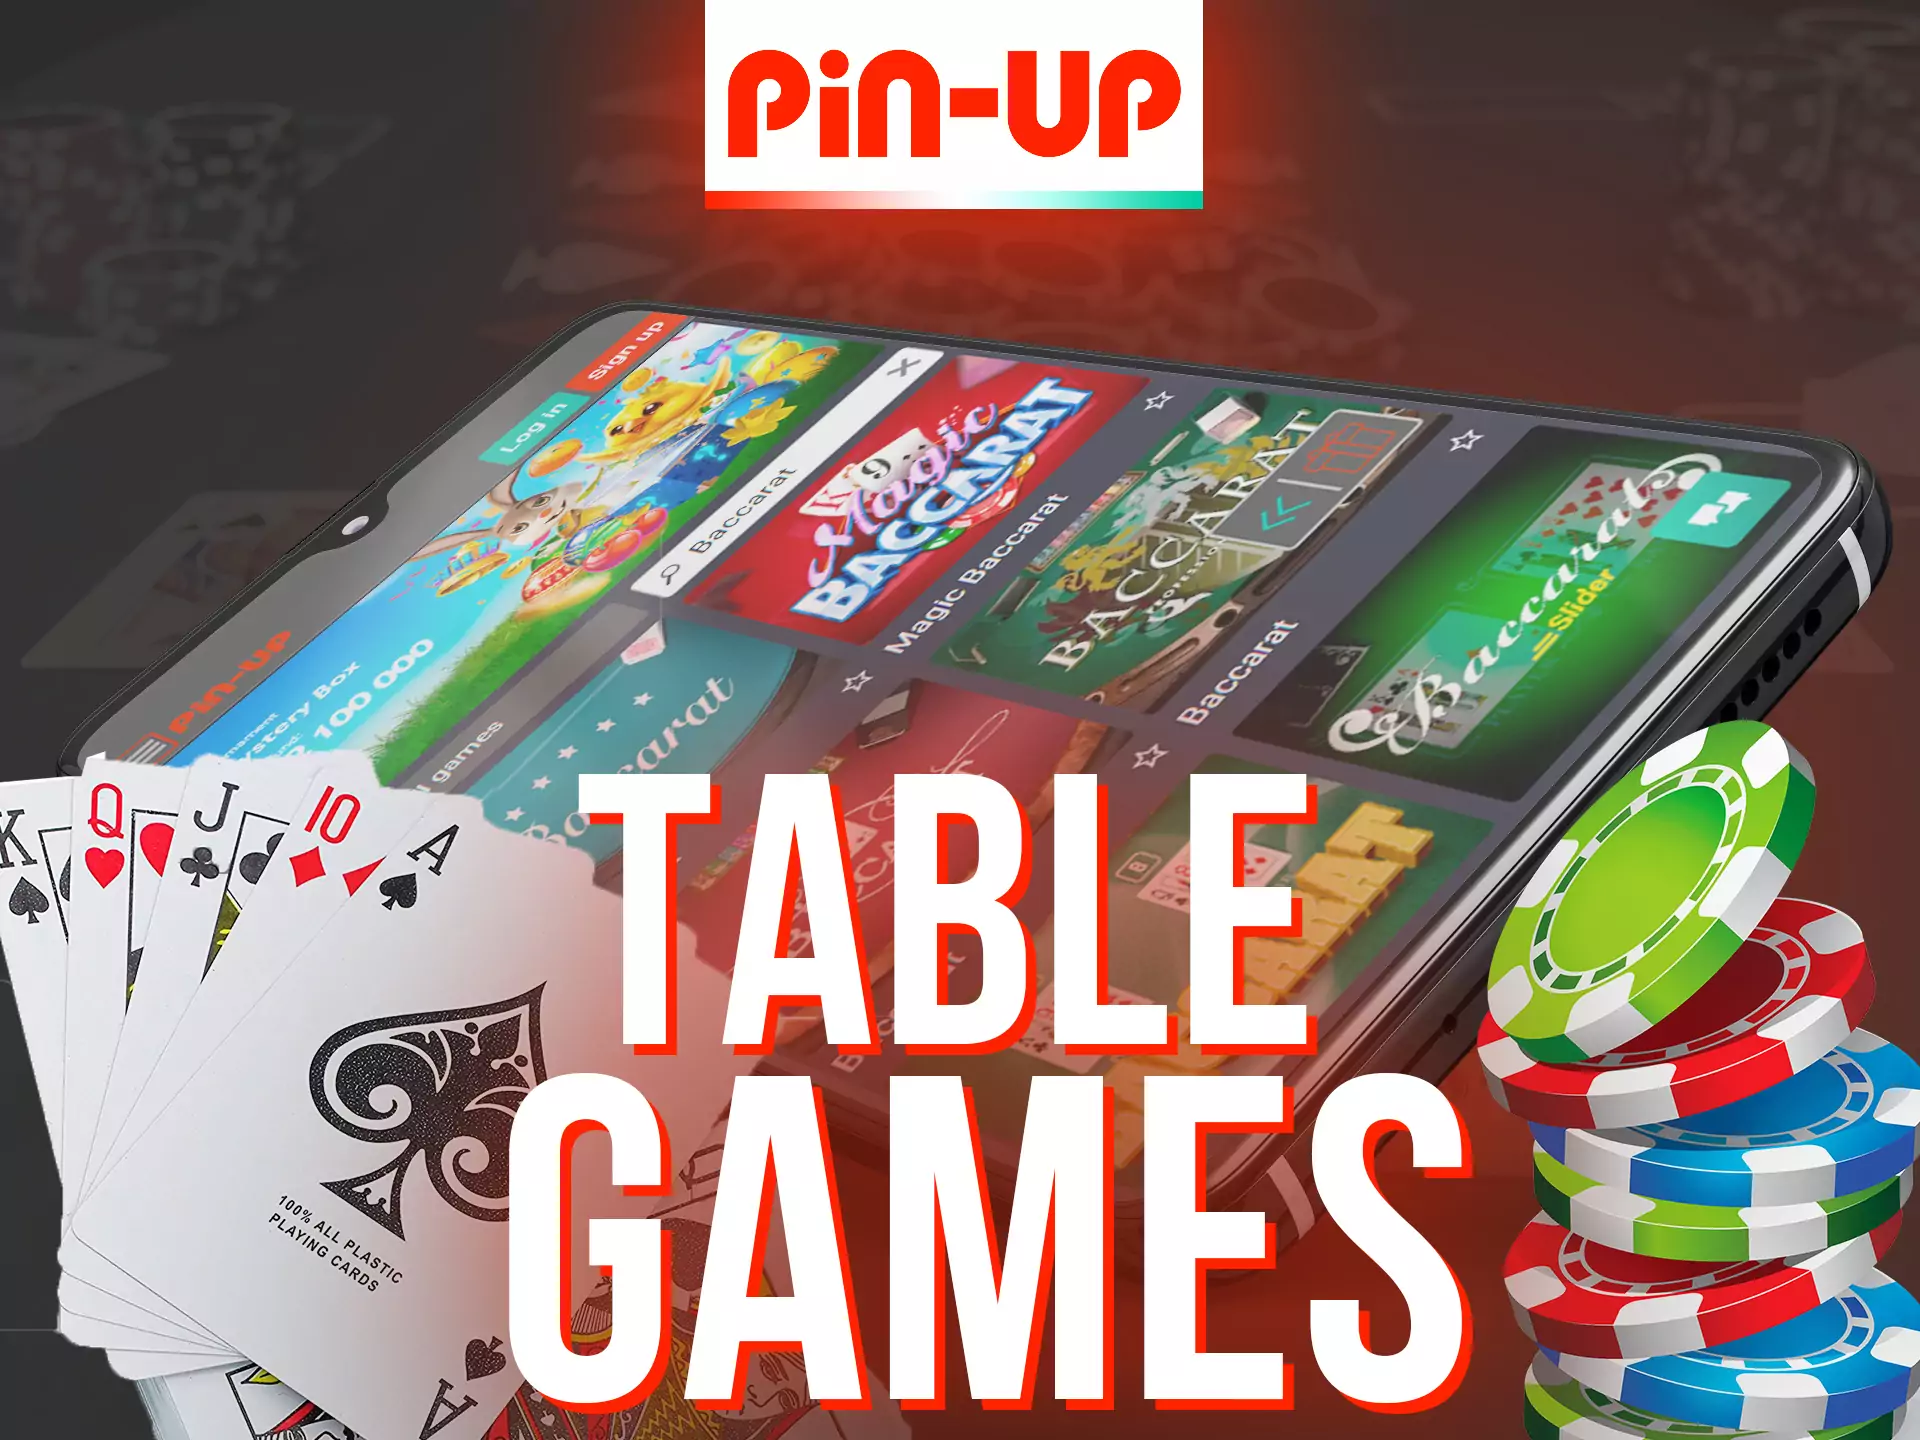 In the Pin-Up app you can play casino table games.